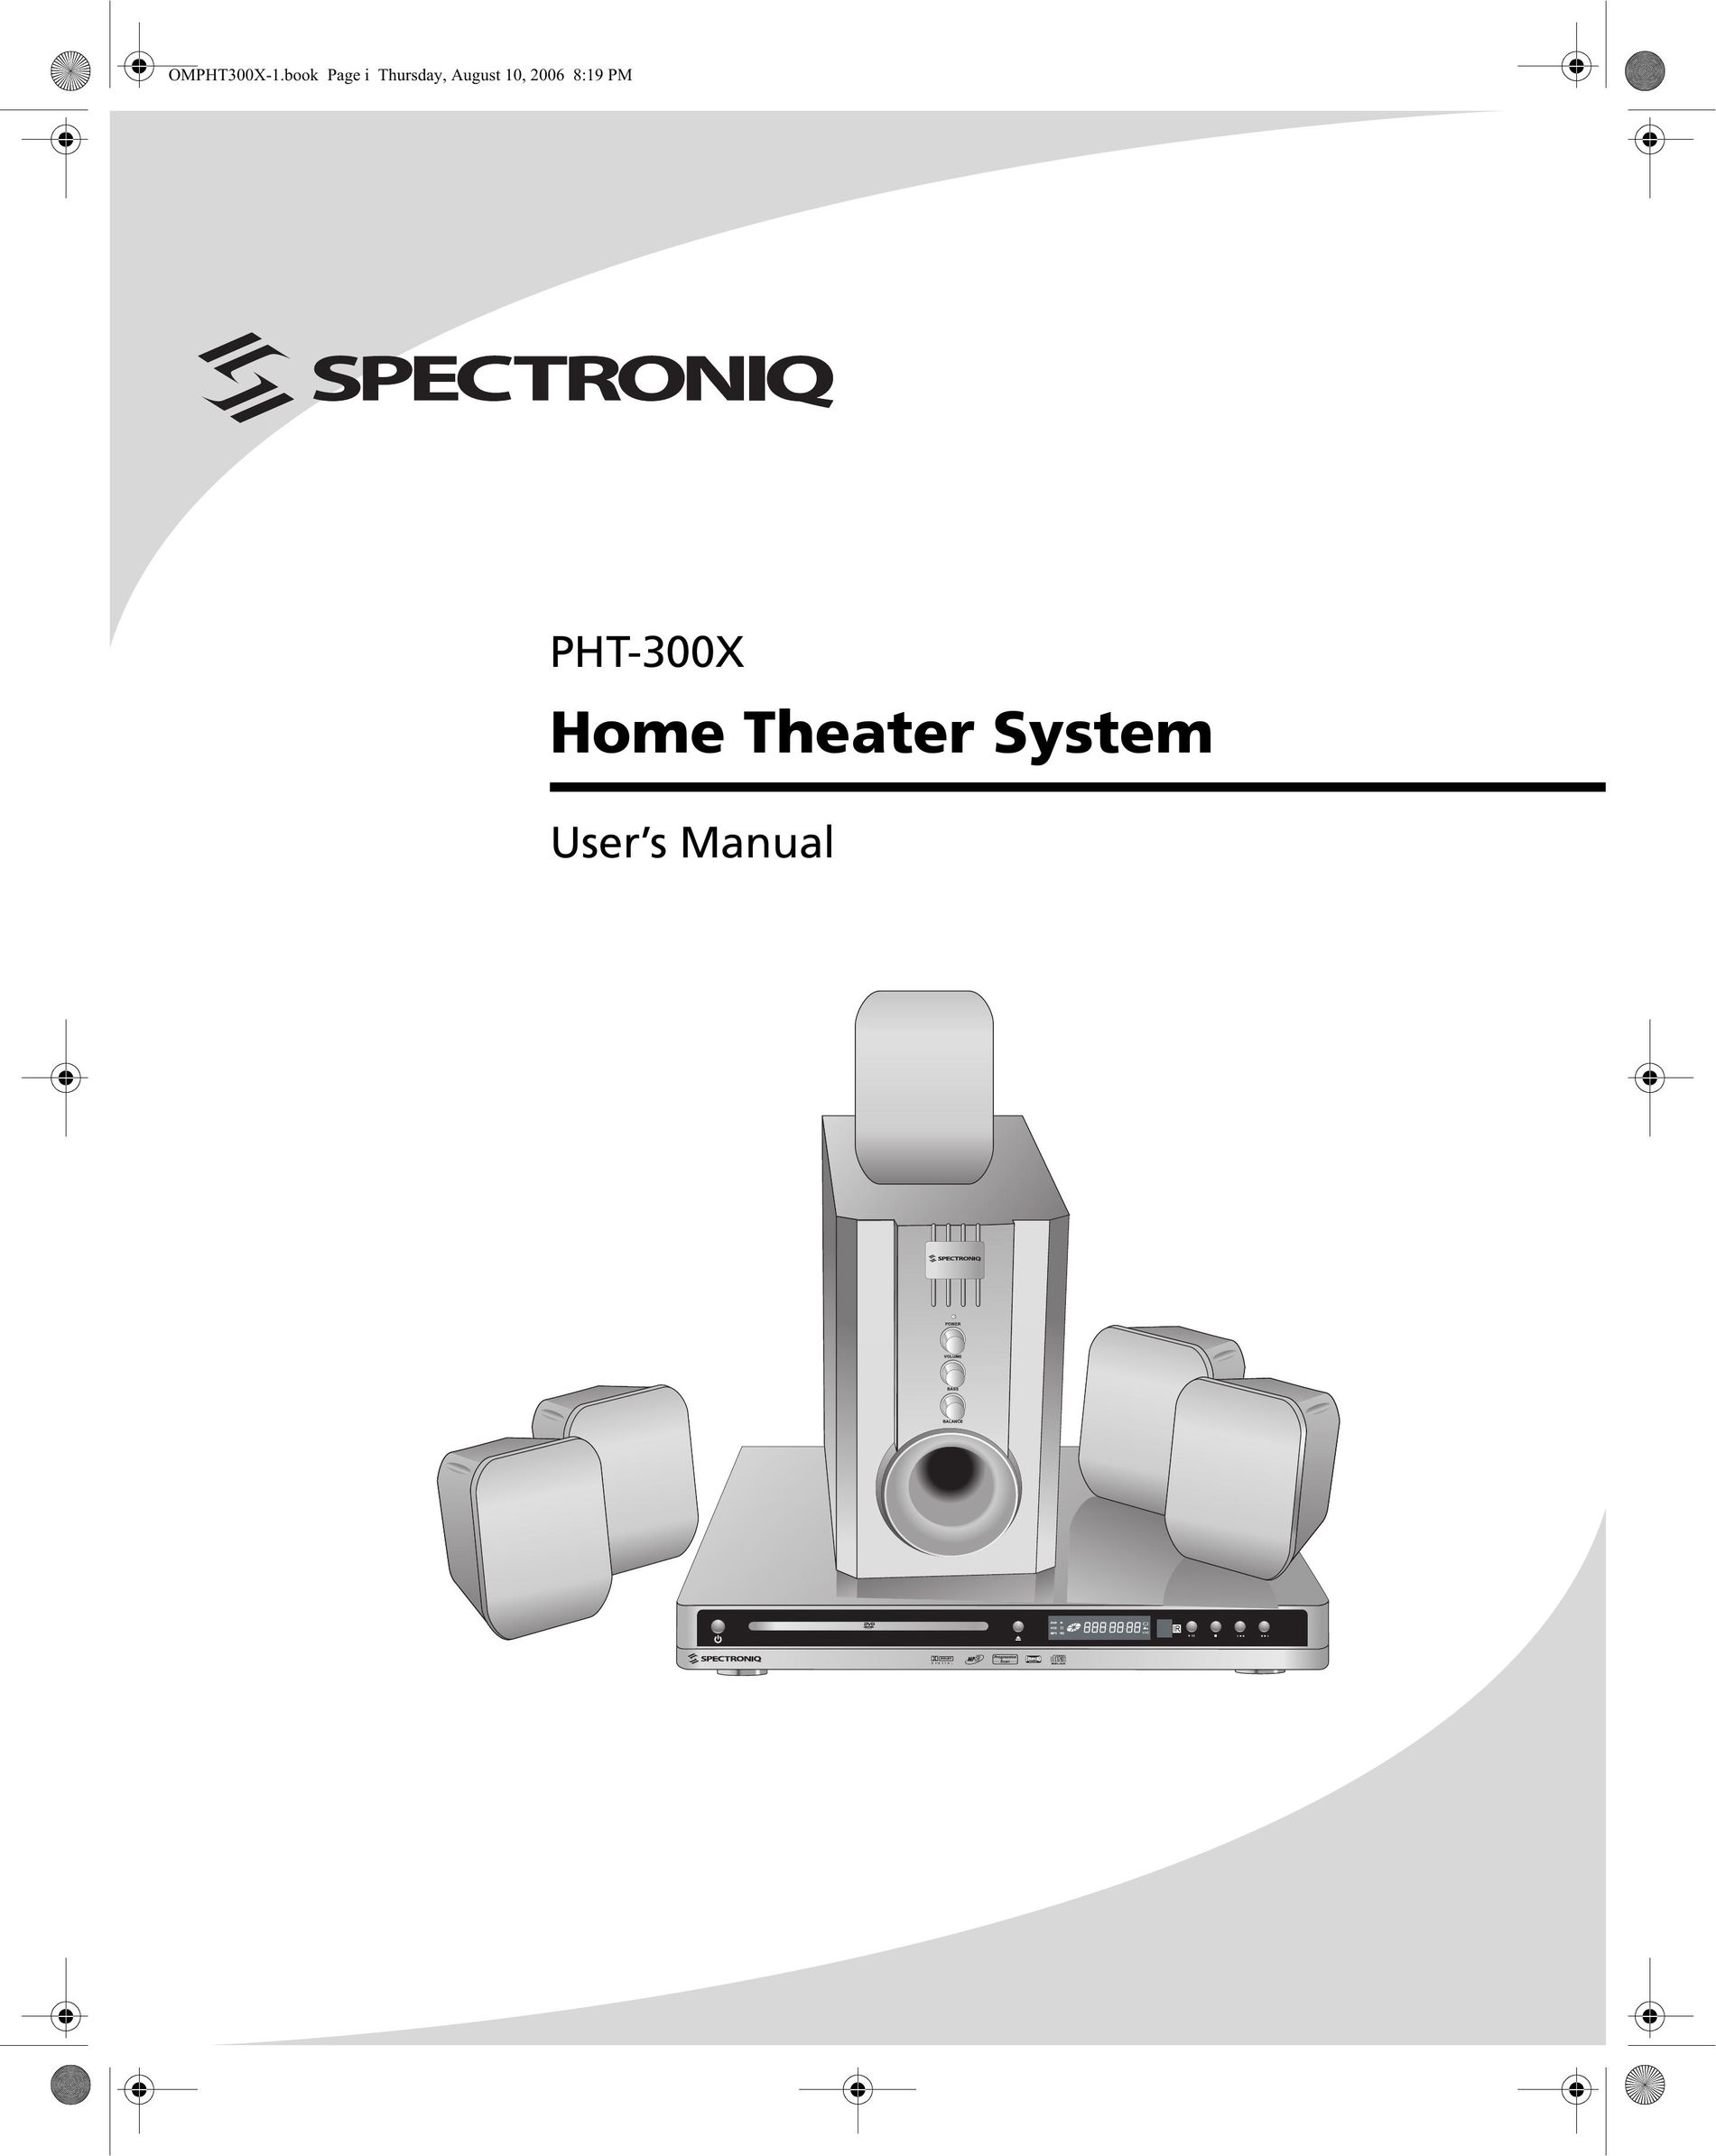 SpectronIQ PHT-300X Home Theater System User Manual